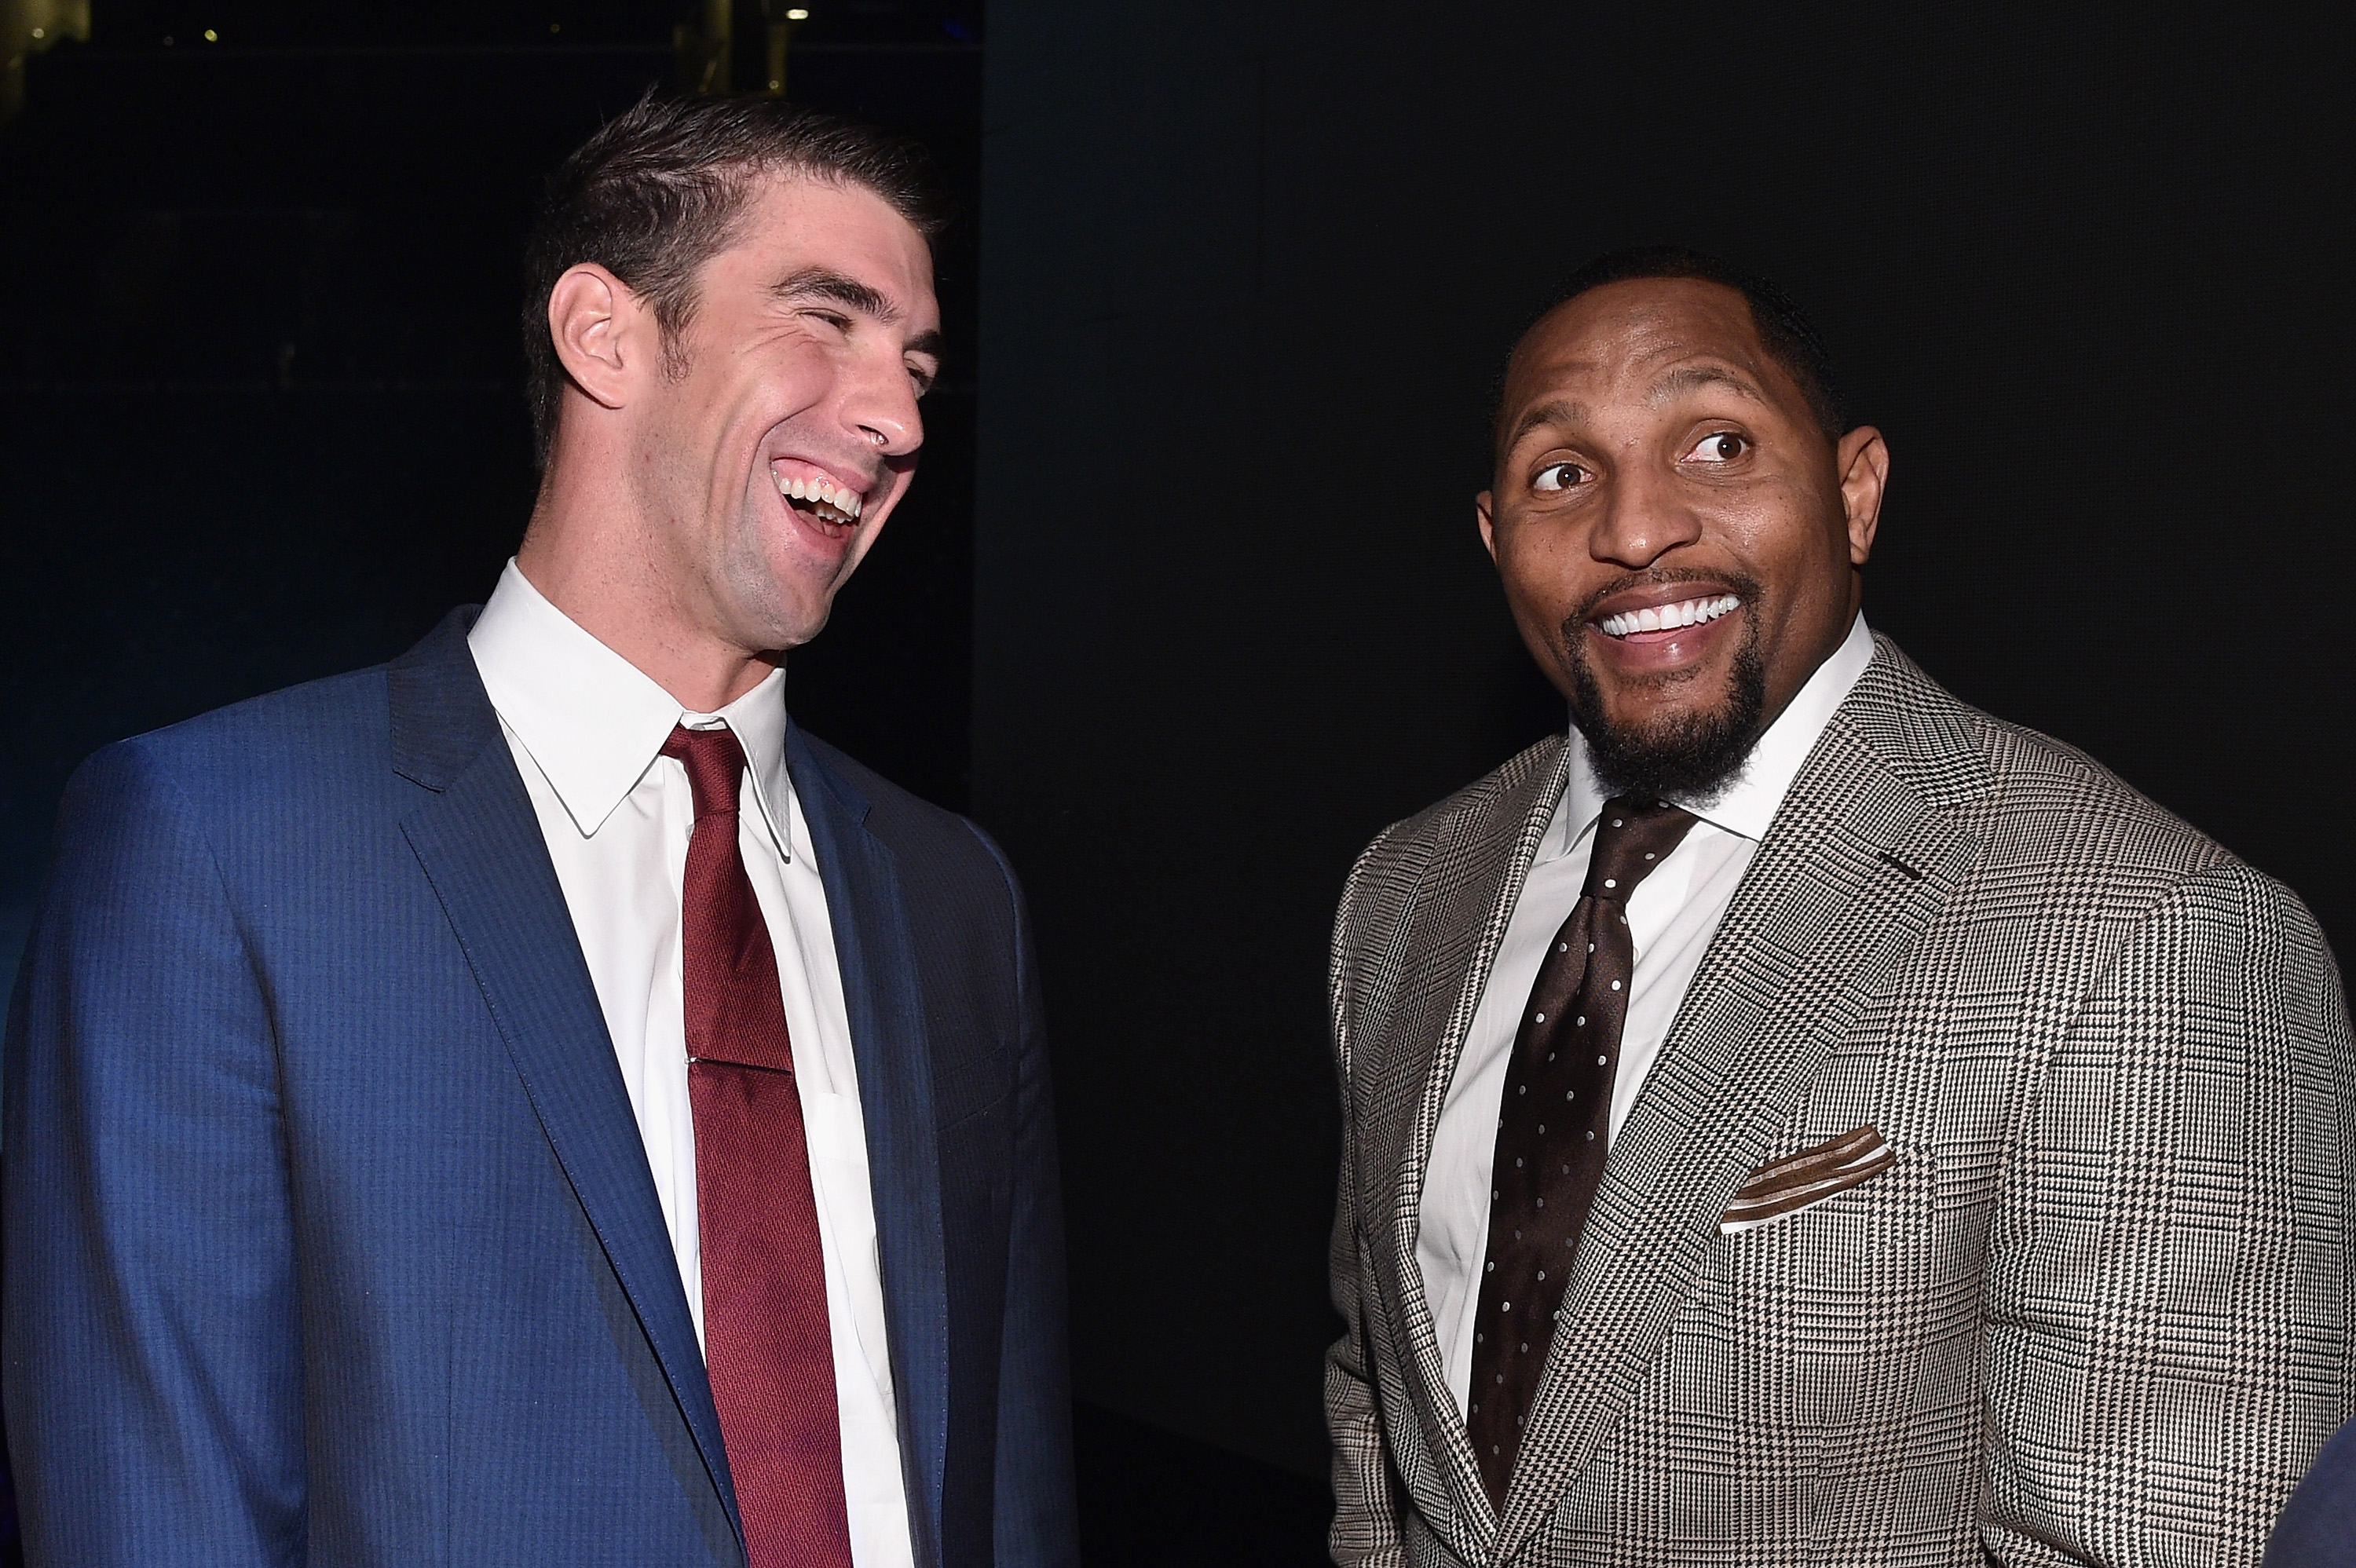 Michael Phelps and Ray Lewis attend the Sports Illustrated Sportsperson of the Year Ceremony